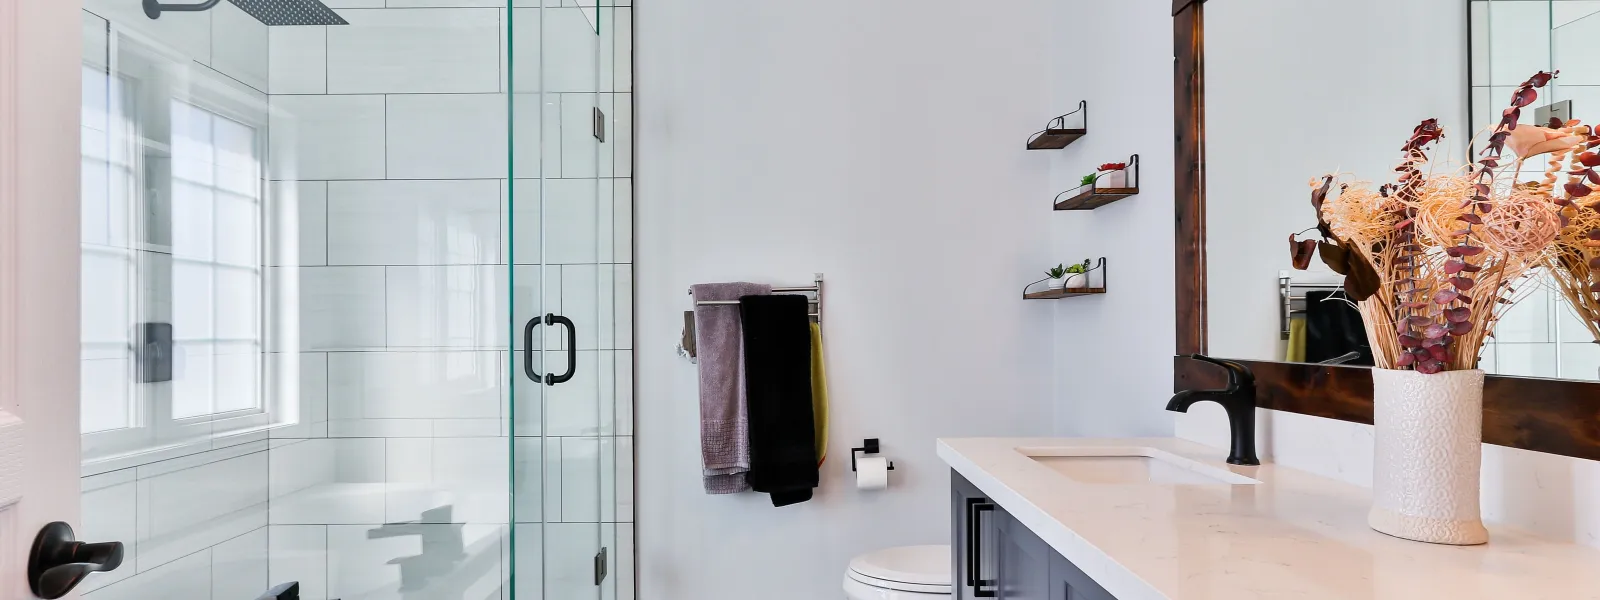 Get the Most Value Out of Your Bathroom Renovation